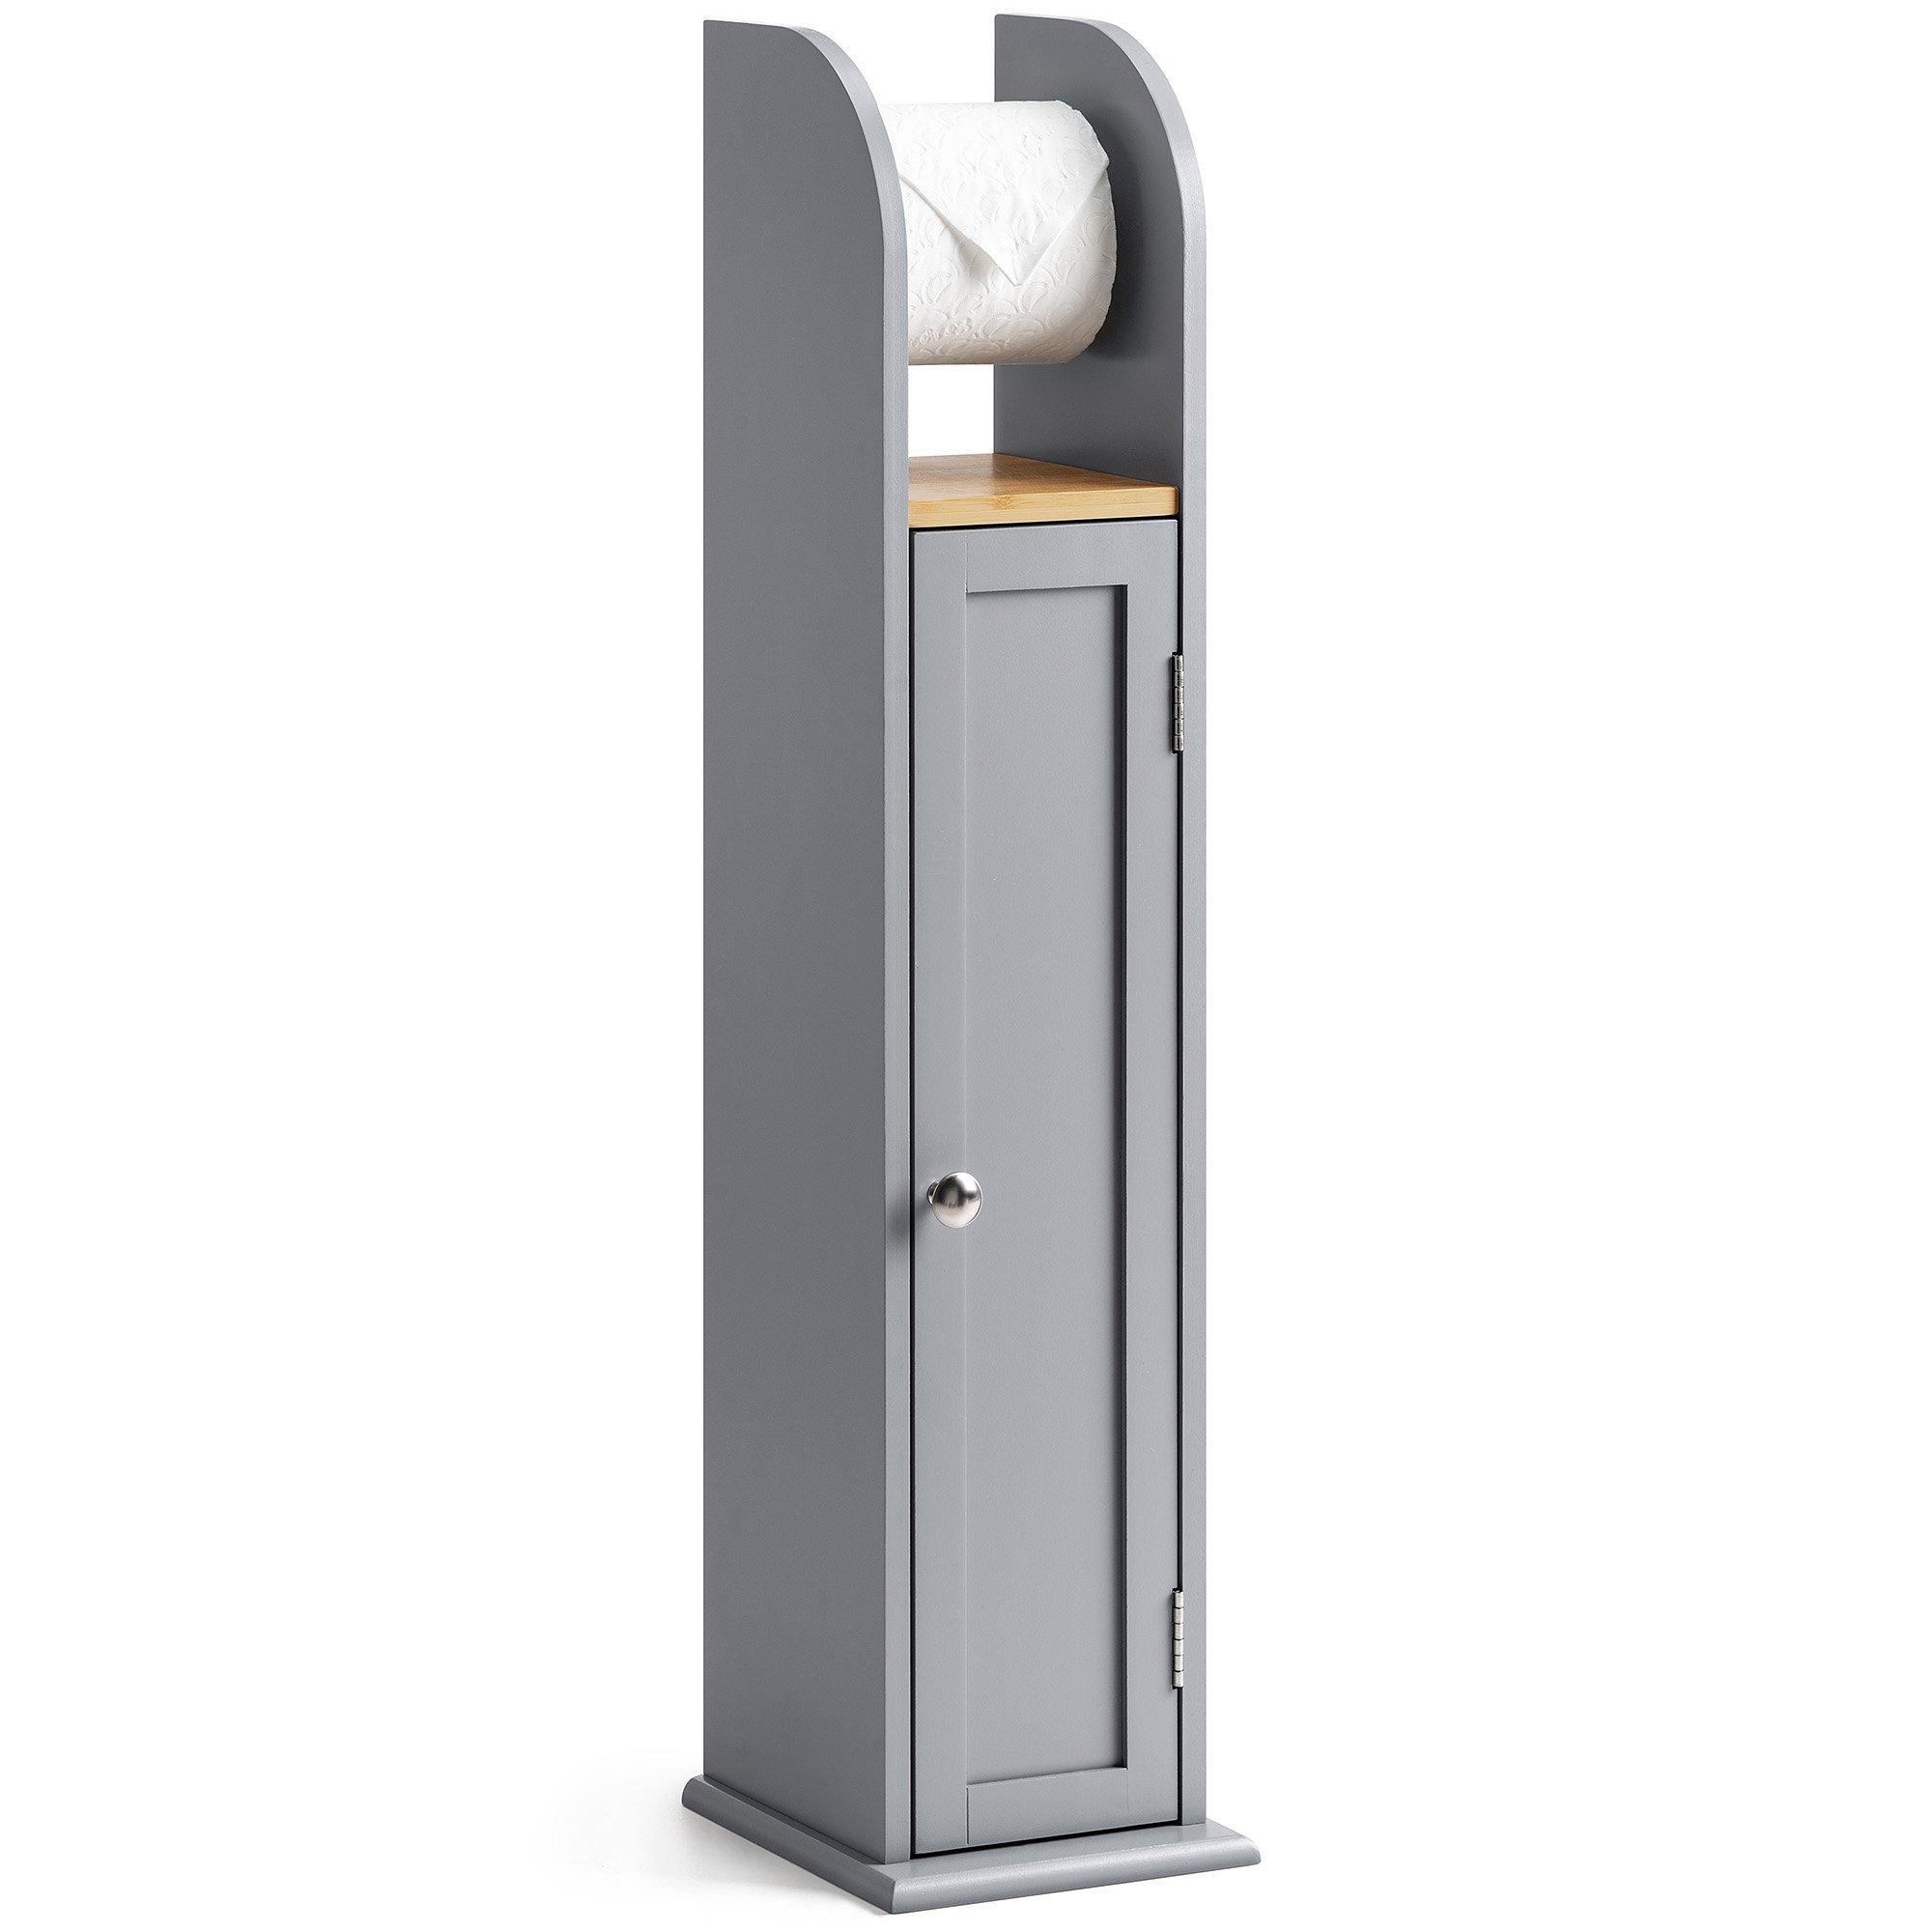 Toilet Roll Holder Cabinet Freestanding Grey Bamboo Wood Bathroom Unit Christow - image 1